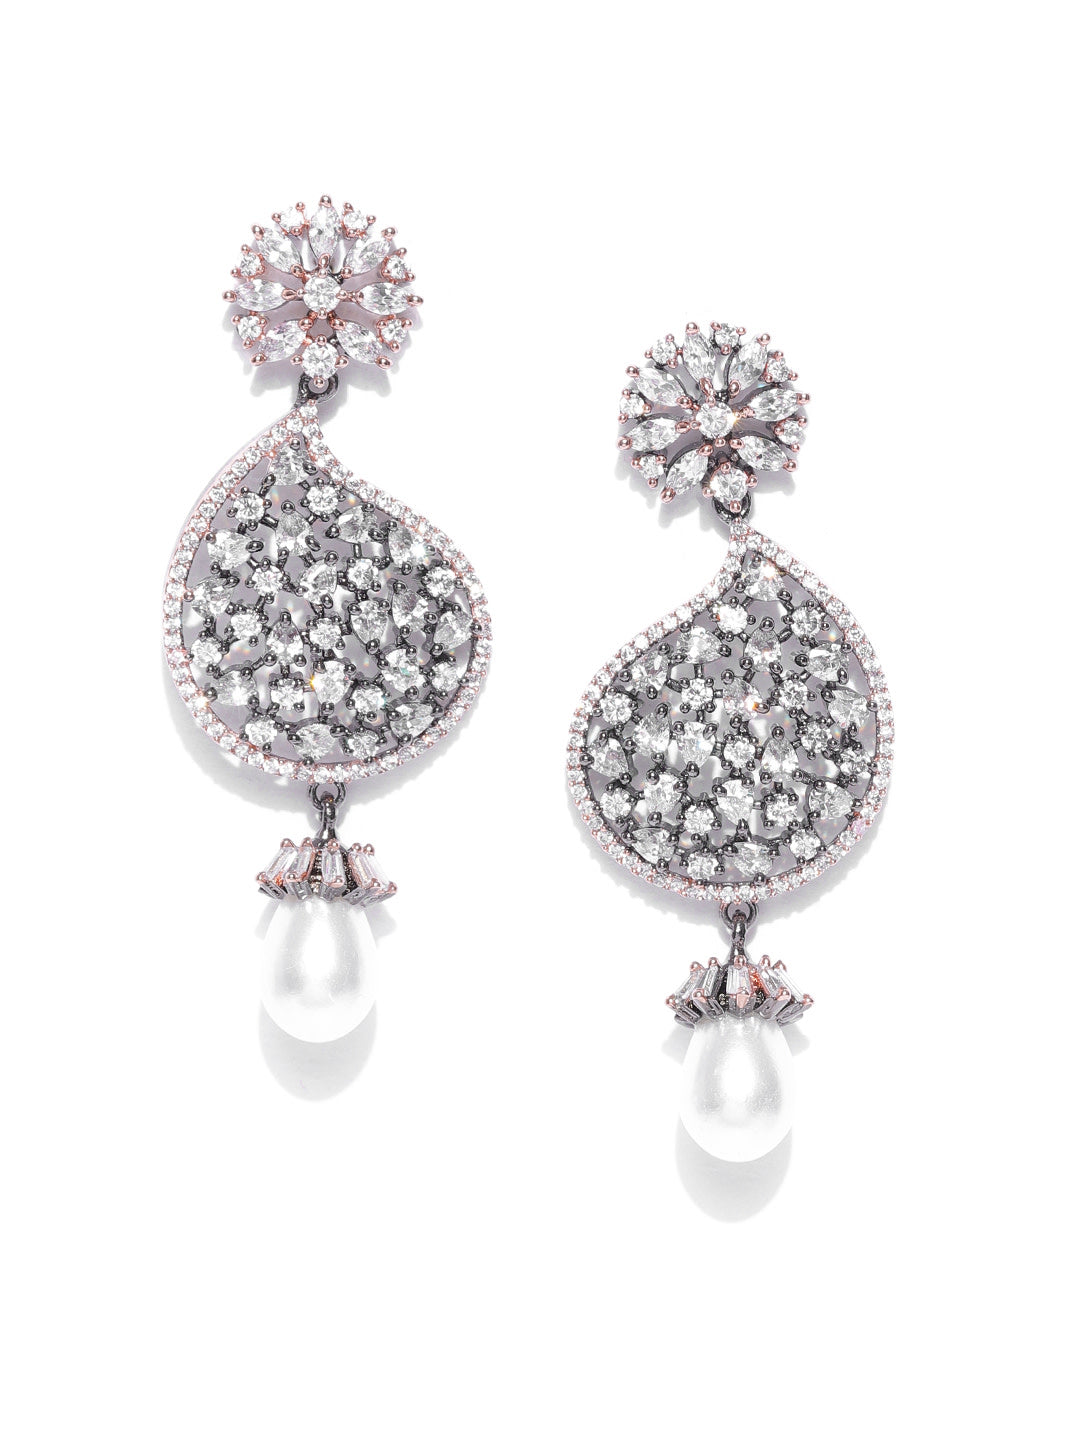 Stylish Tear Drop Shaped Stone Studded Earring With Pearl Drop For Women And Girls